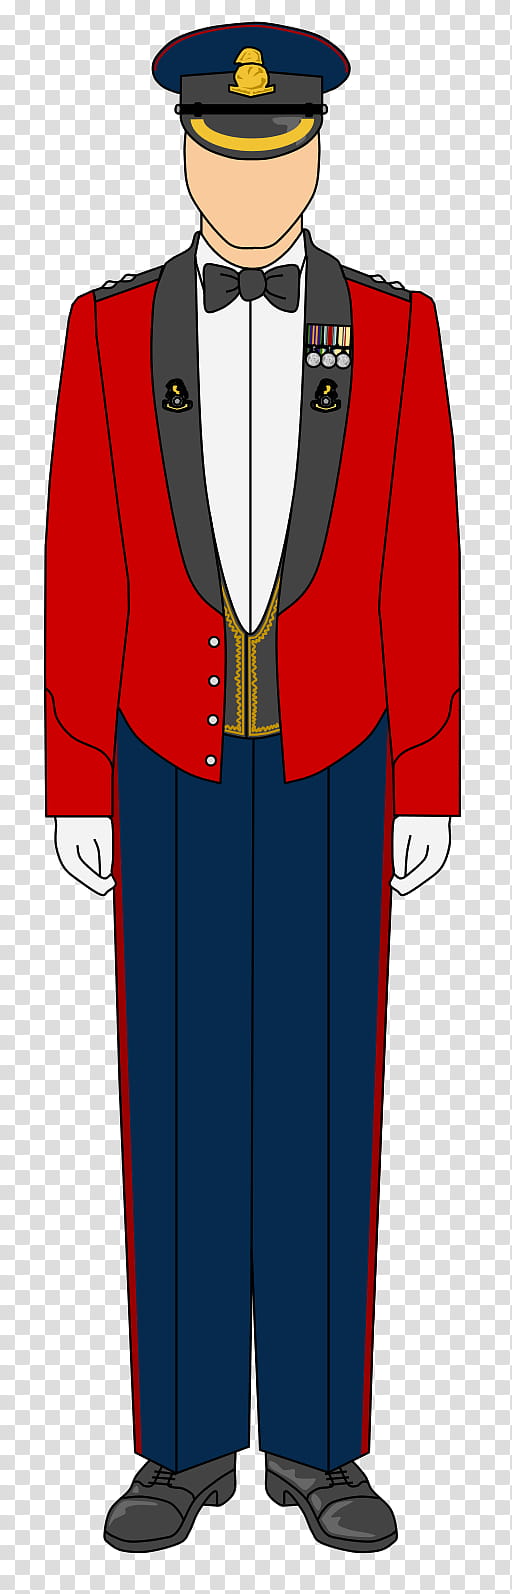 Army, Mess Dress Uniform, Uniforms Of The British Army, British Army Mess Dress, Army Officer, Military, Army Service Uniform, Formal Wear transparent background PNG clipart